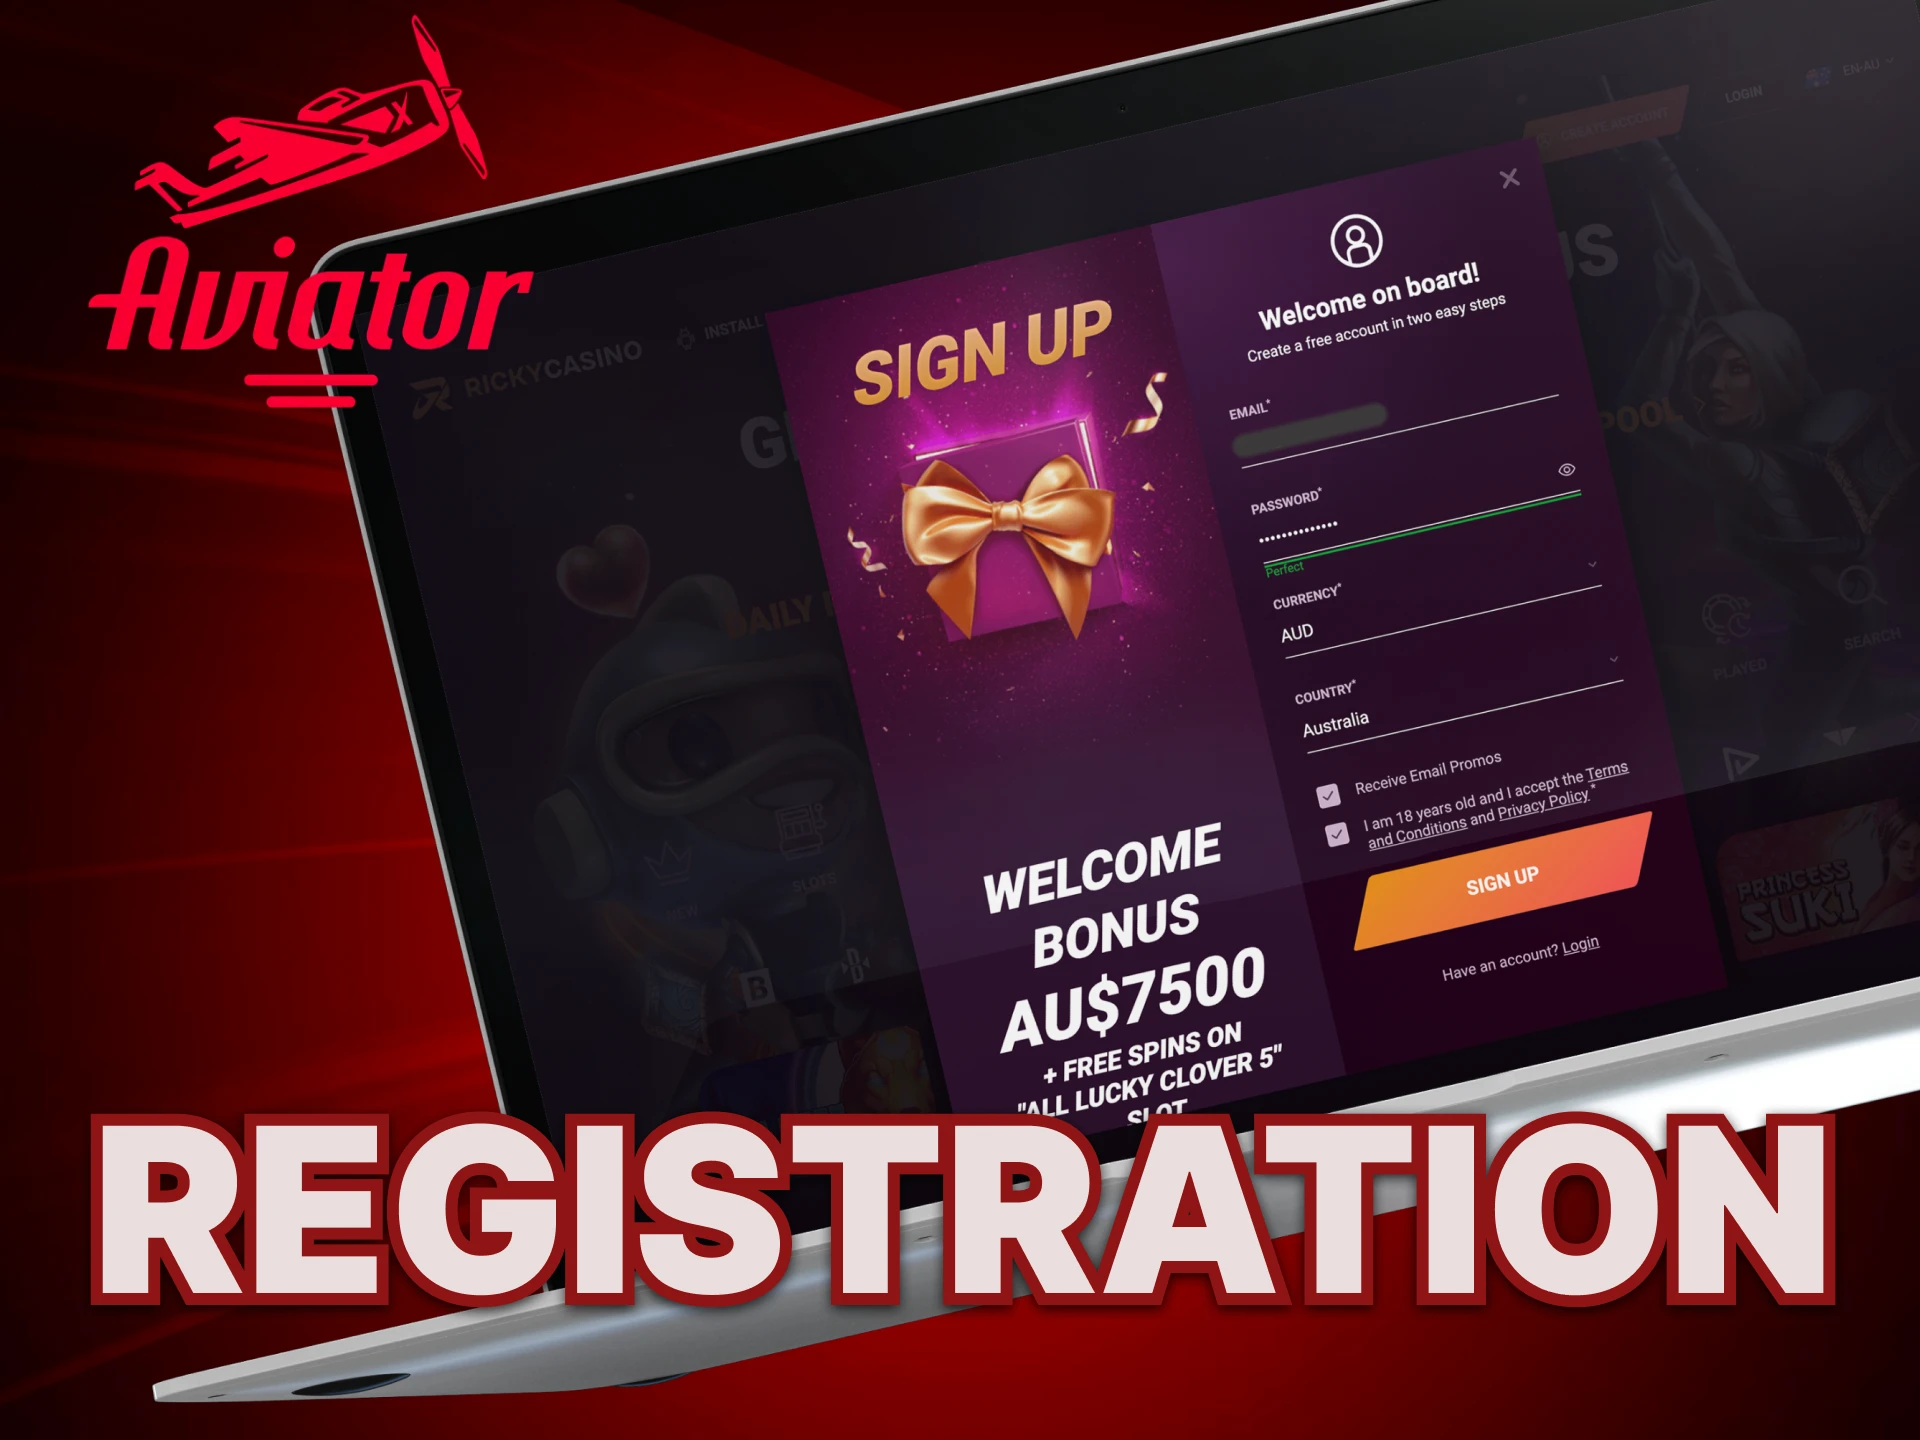 How to register in the Aviator game.